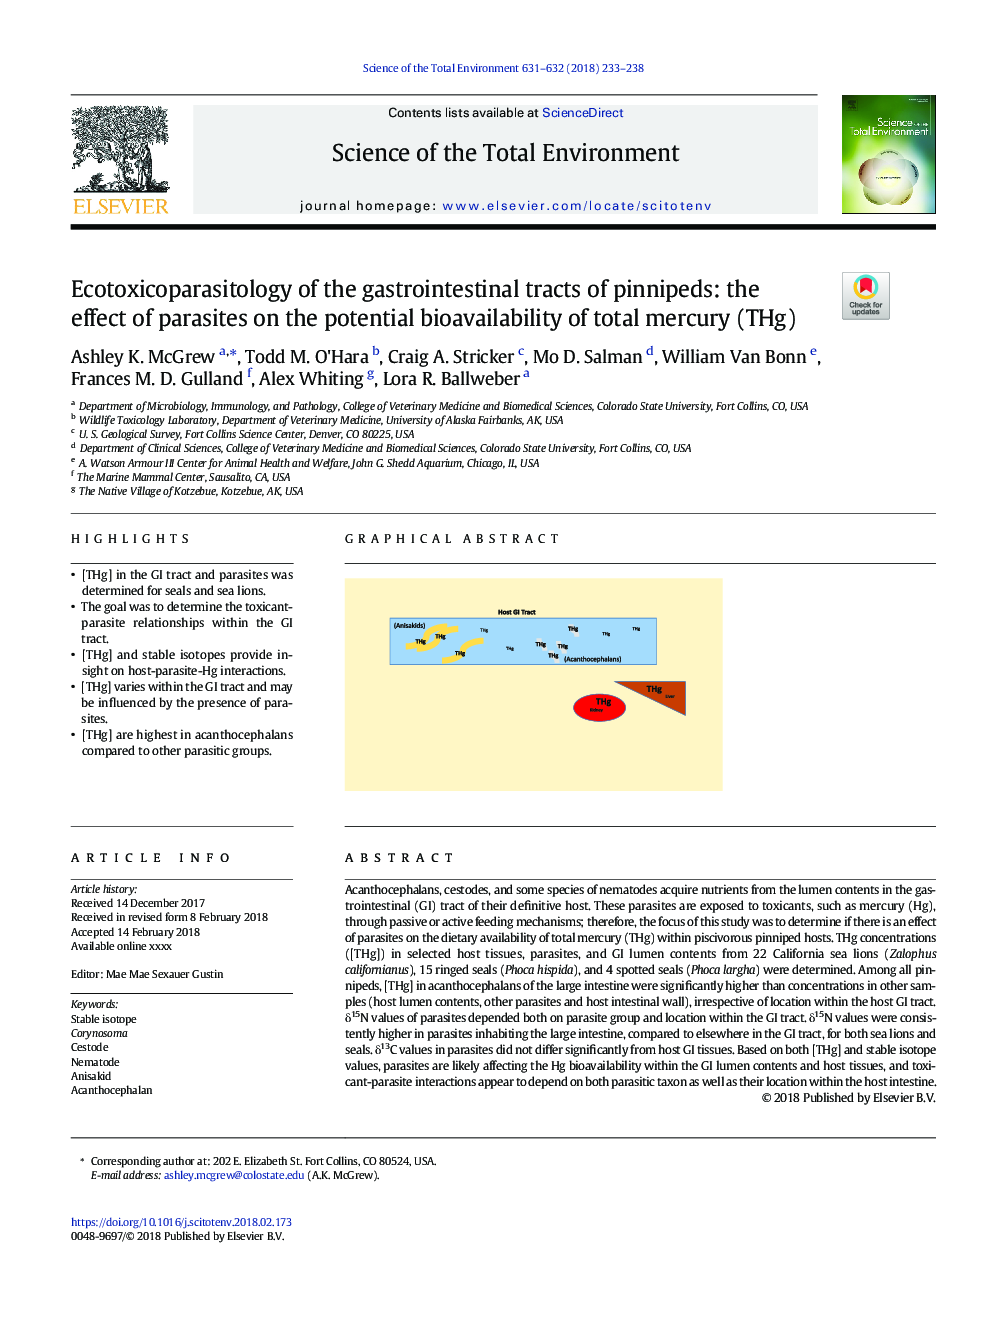 Ecotoxicoparasitology of the gastrointestinal tracts of pinnipeds: the effect of parasites on the potential bioavailability of total mercury (THg)